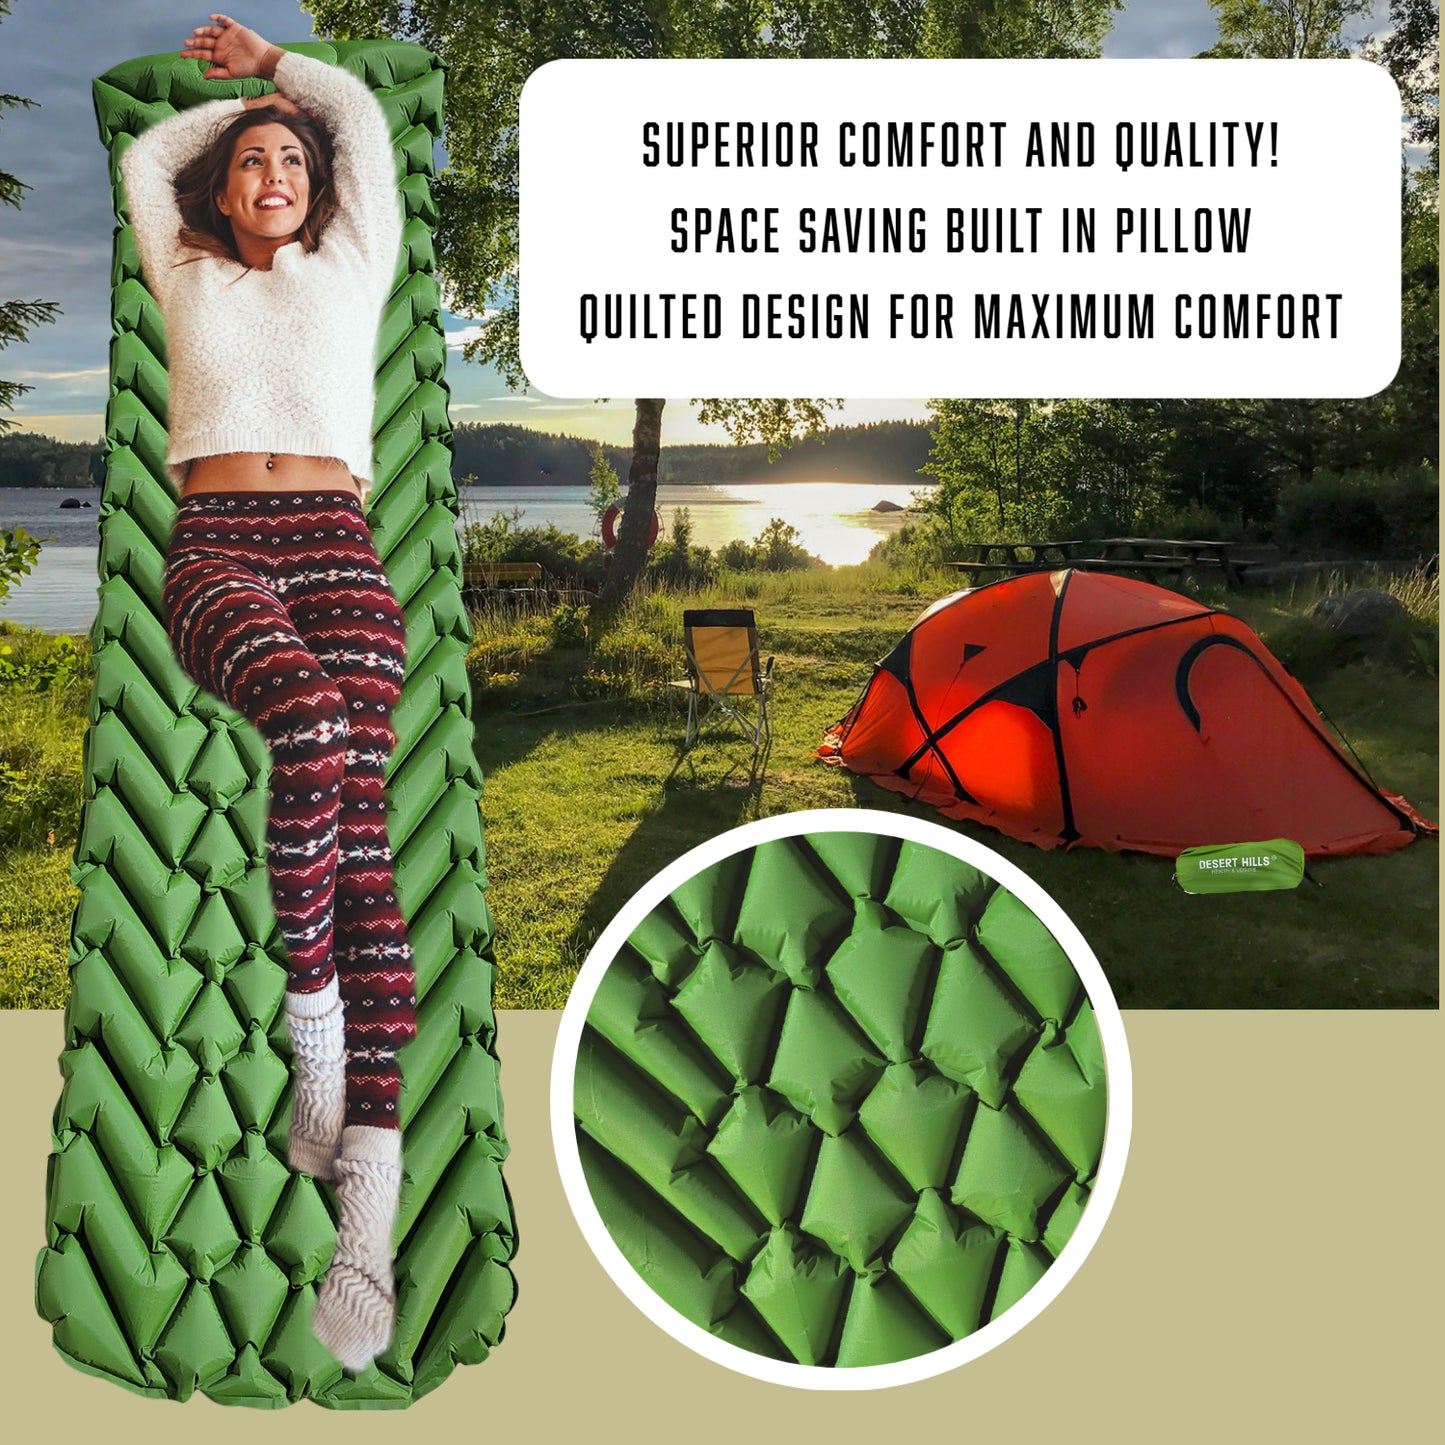 Sleep Pad with Built In Foot/Hand Pump Sleeping Pad Ultralight Compact Lightweight Waterproof Inflatable Camping Pad for Camping Hiking and Backpacking